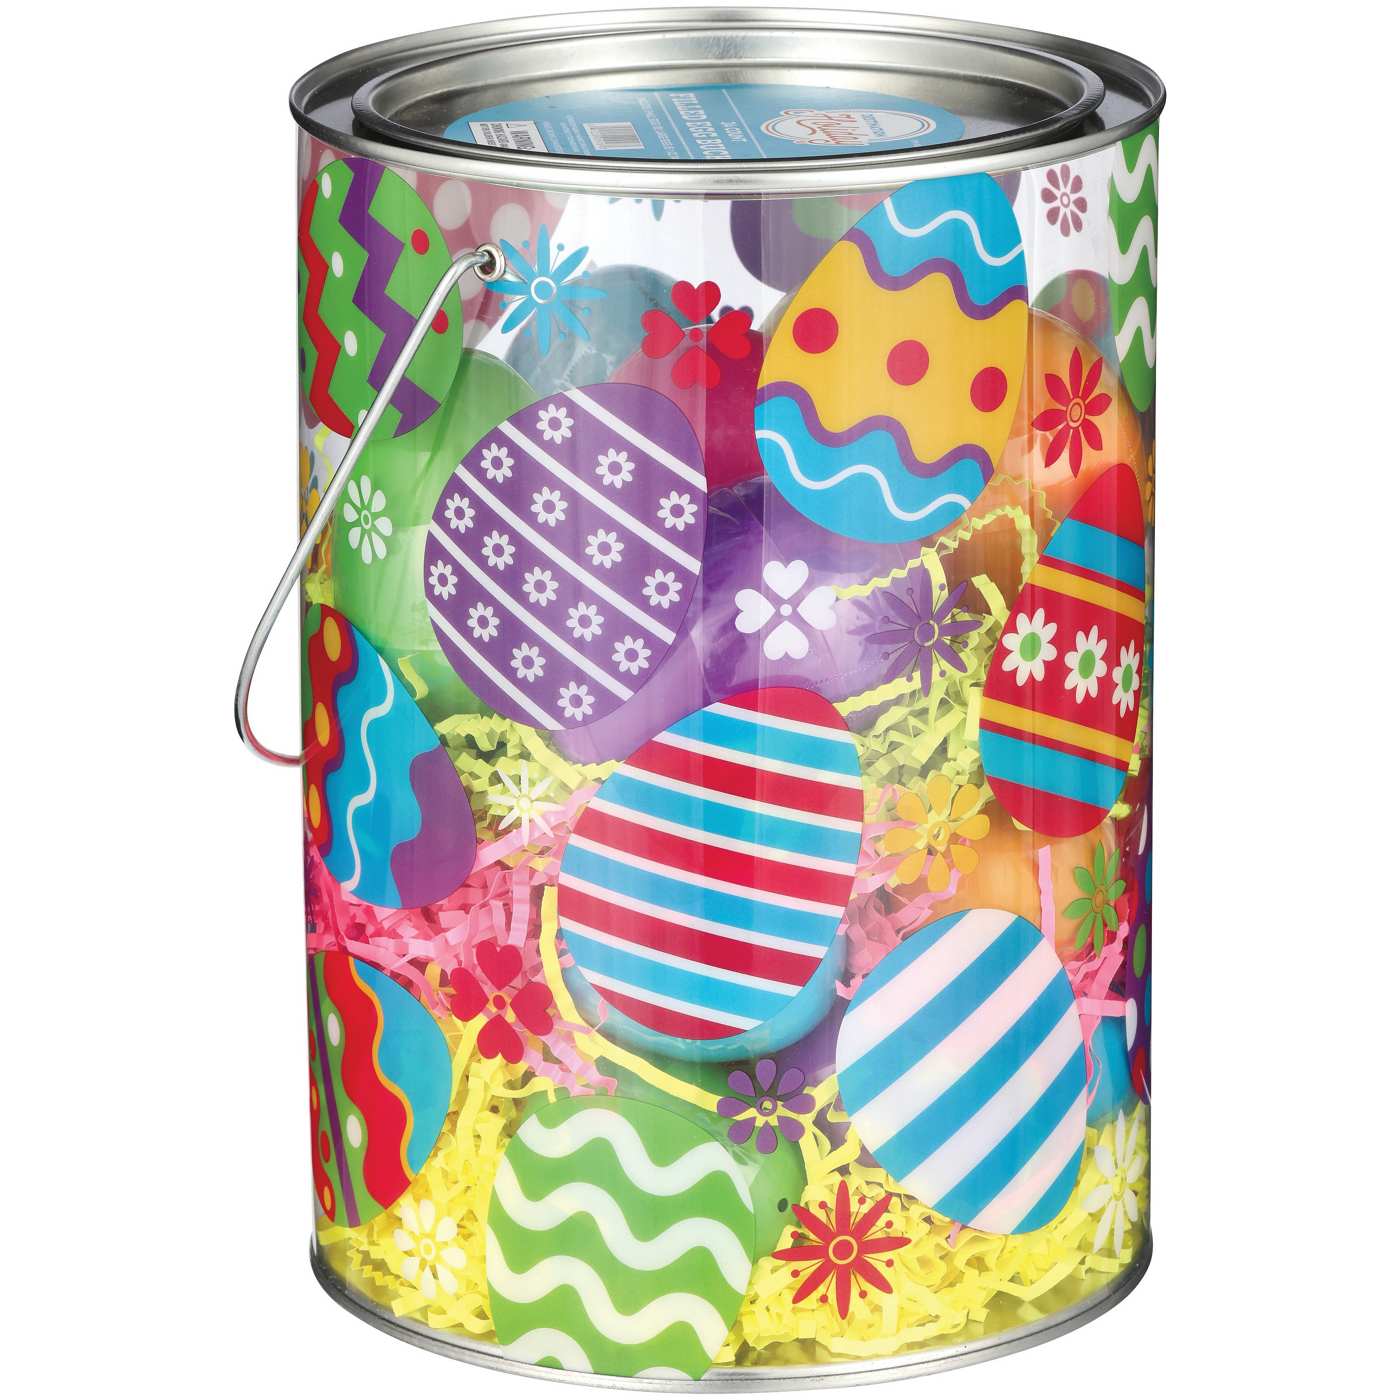 Destination Holiday Easter Filled Egg Bucket - Shop Party Decor at H-E-B